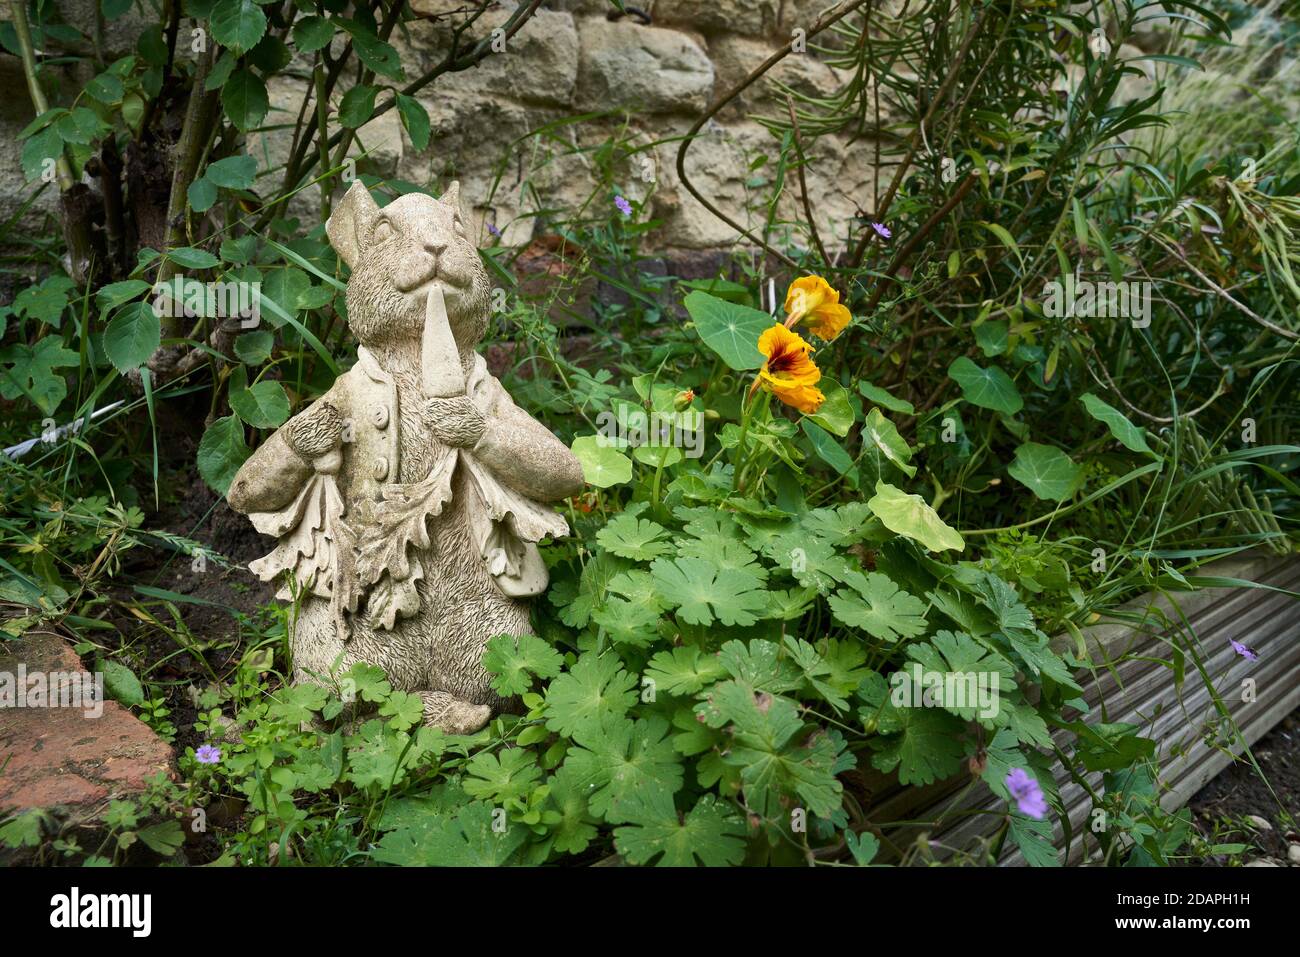 Cast concrete garden statue of the character Peter Rabbit eating a carrot in an overgrown garden border against a stone wall Stock Photo